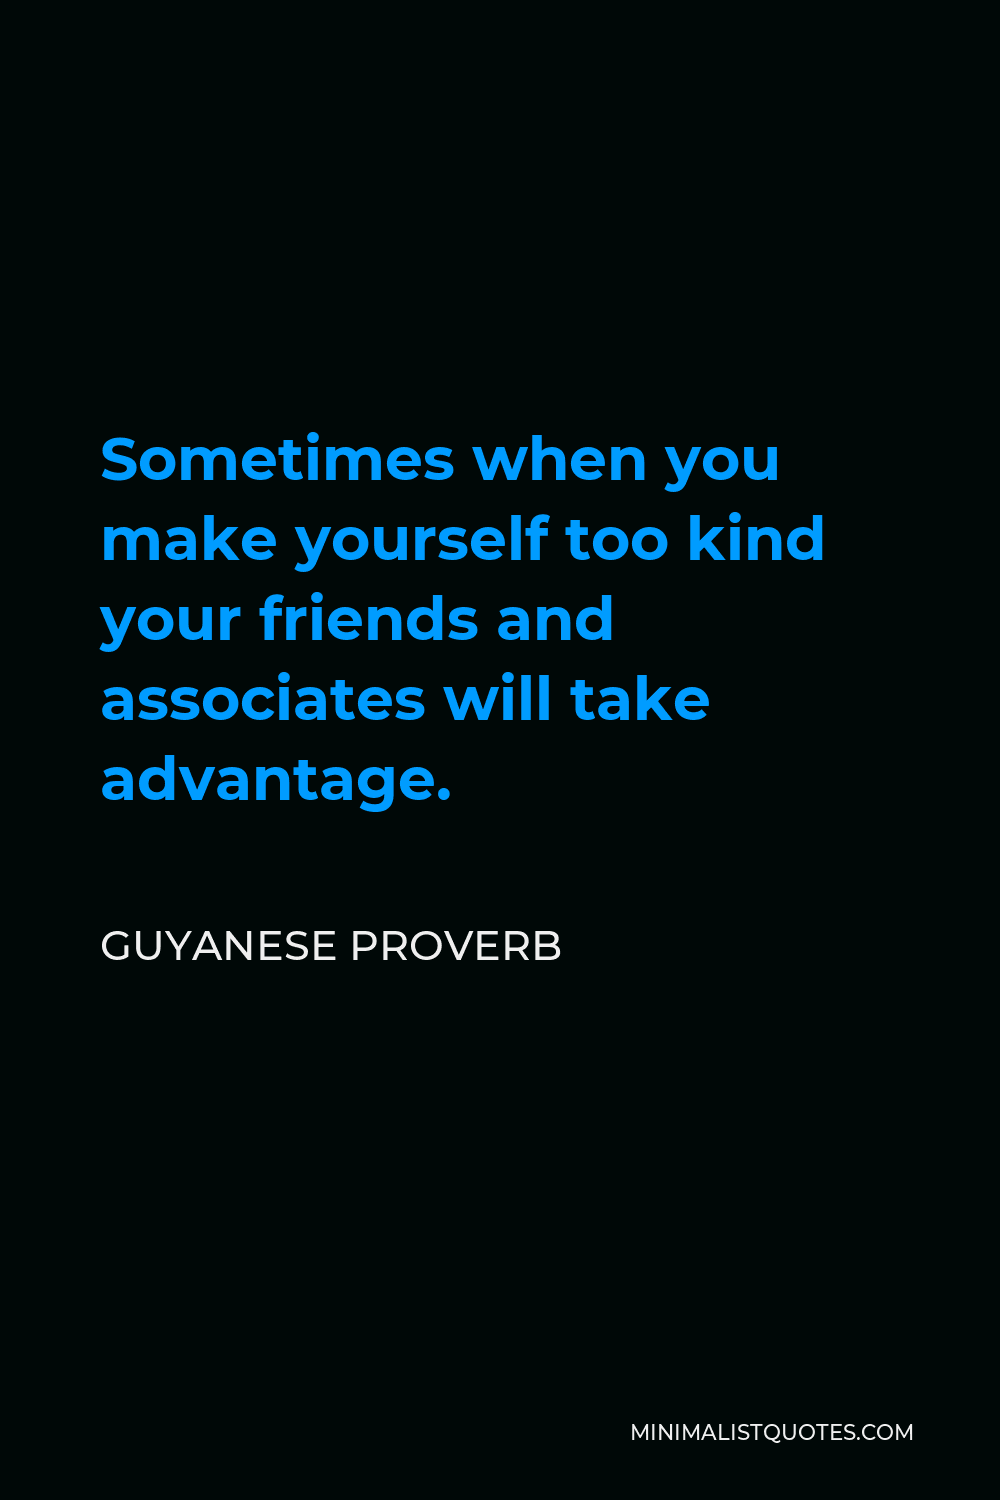 Guyanese Proverb Quote - Sometimes when you make yourself too kind your friends and associates will take advantage.